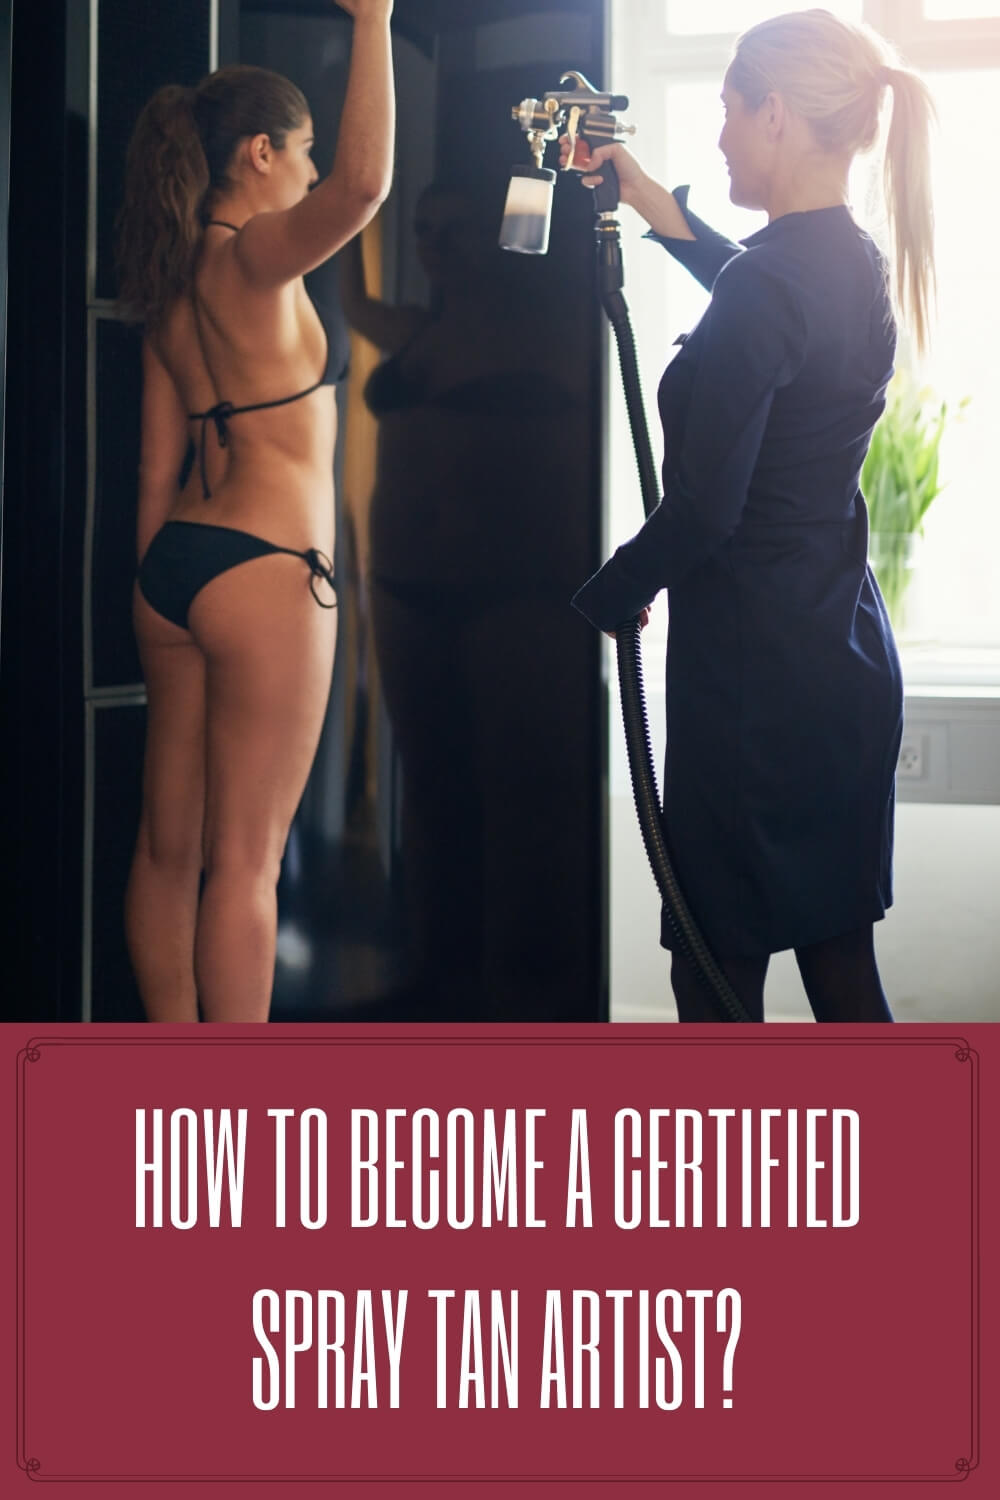 How to Become a Certified Spray Tan Artist